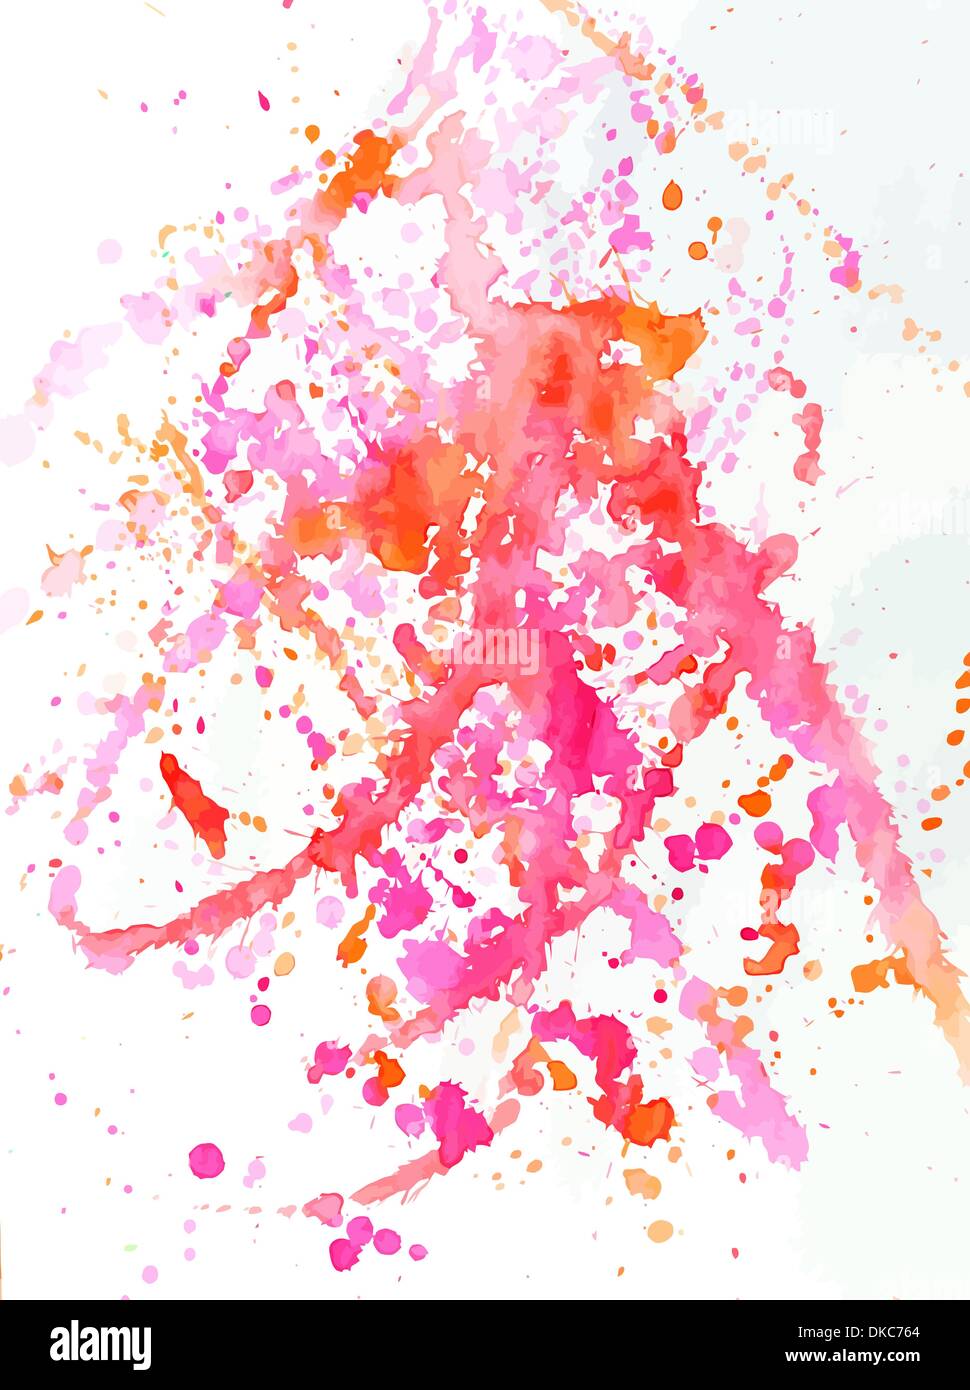 Splattered red watercolor stains on a white background Stock Vector